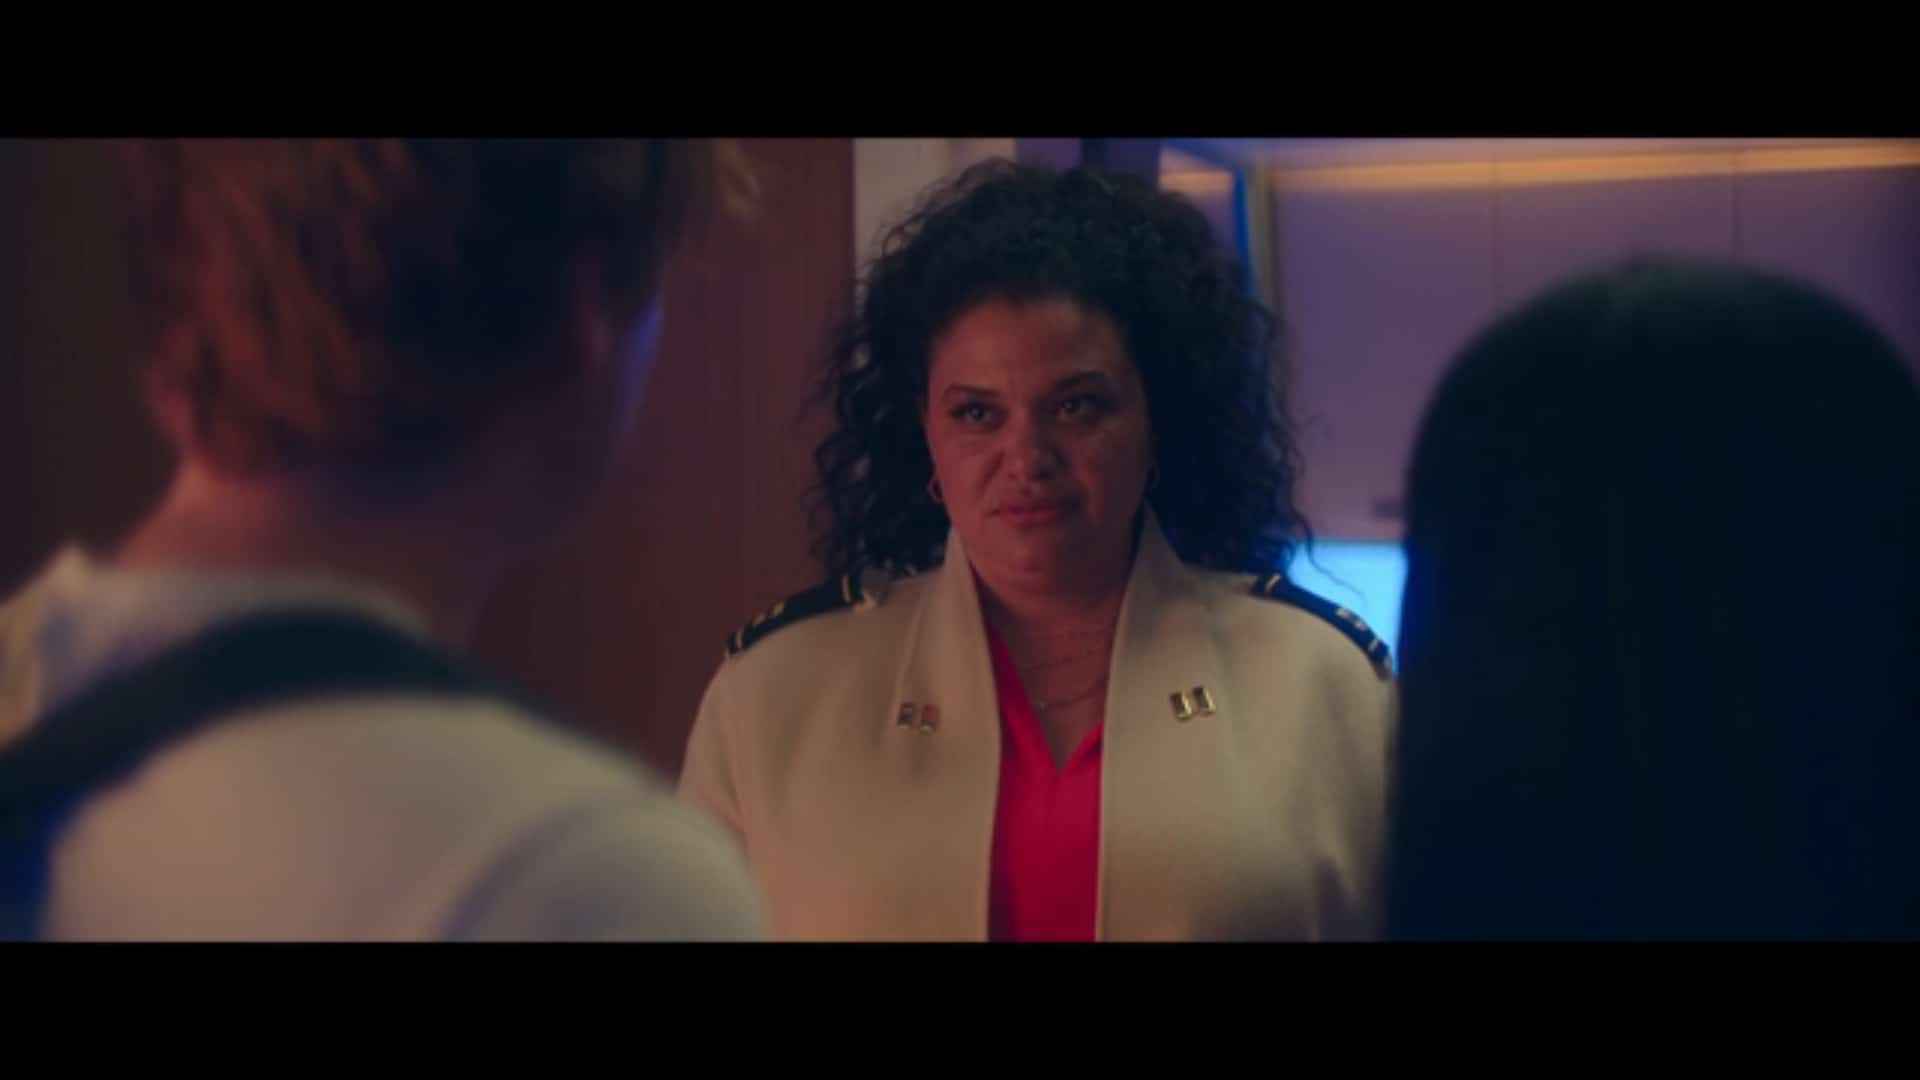 Captain Tarter (Michelle Buteau) talking to Walt and Sophie